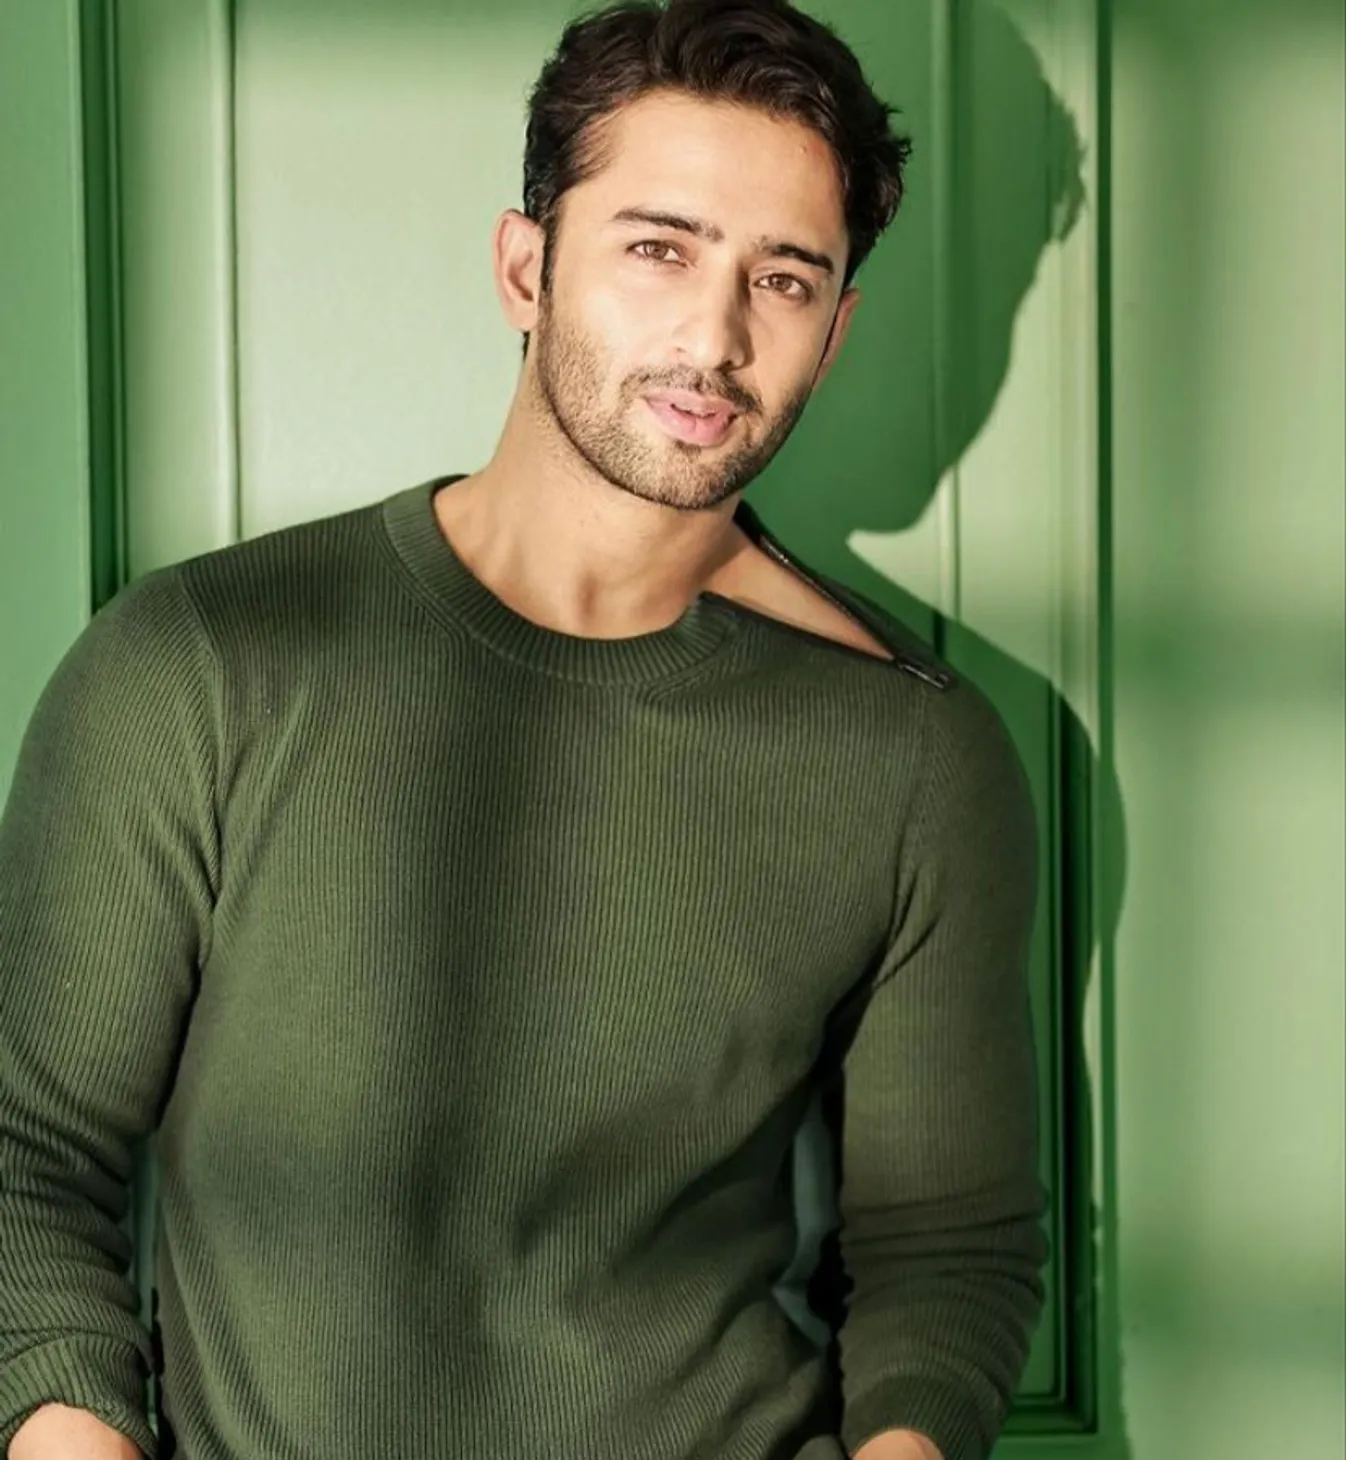 “I don't think I have considered myself stylish especially based on industry norms, but I think simplicity is stylish”, - Shaheer Shaikh